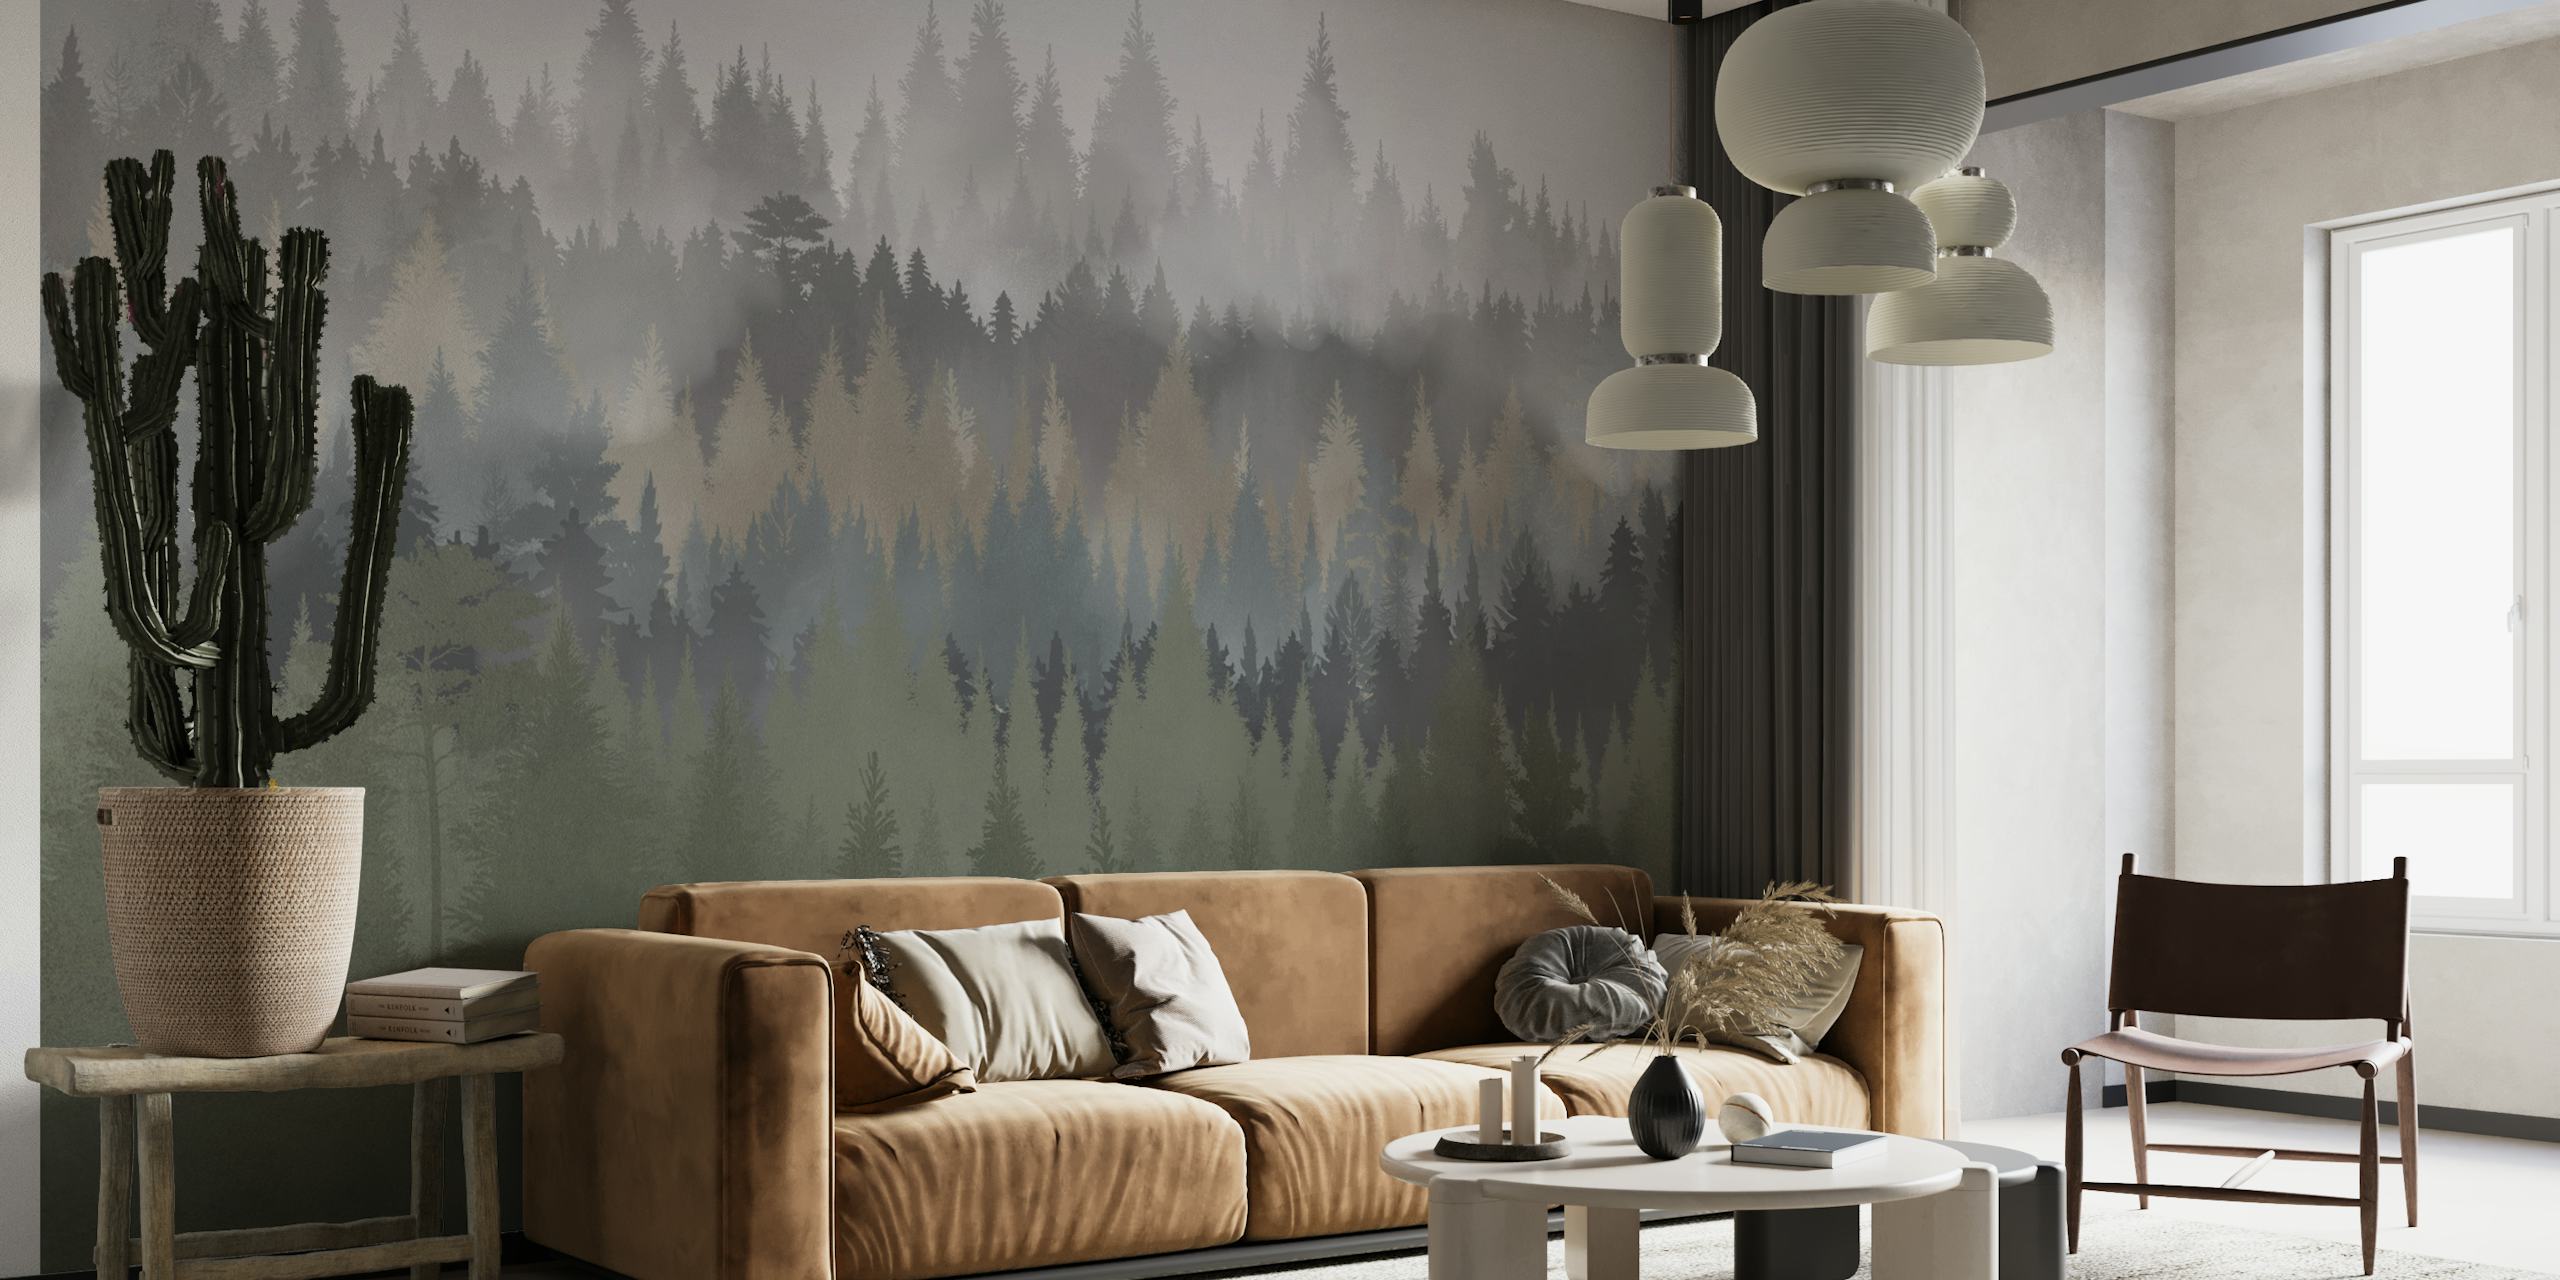 Misty forest wall mural with layers of dark trees vanishing into fog